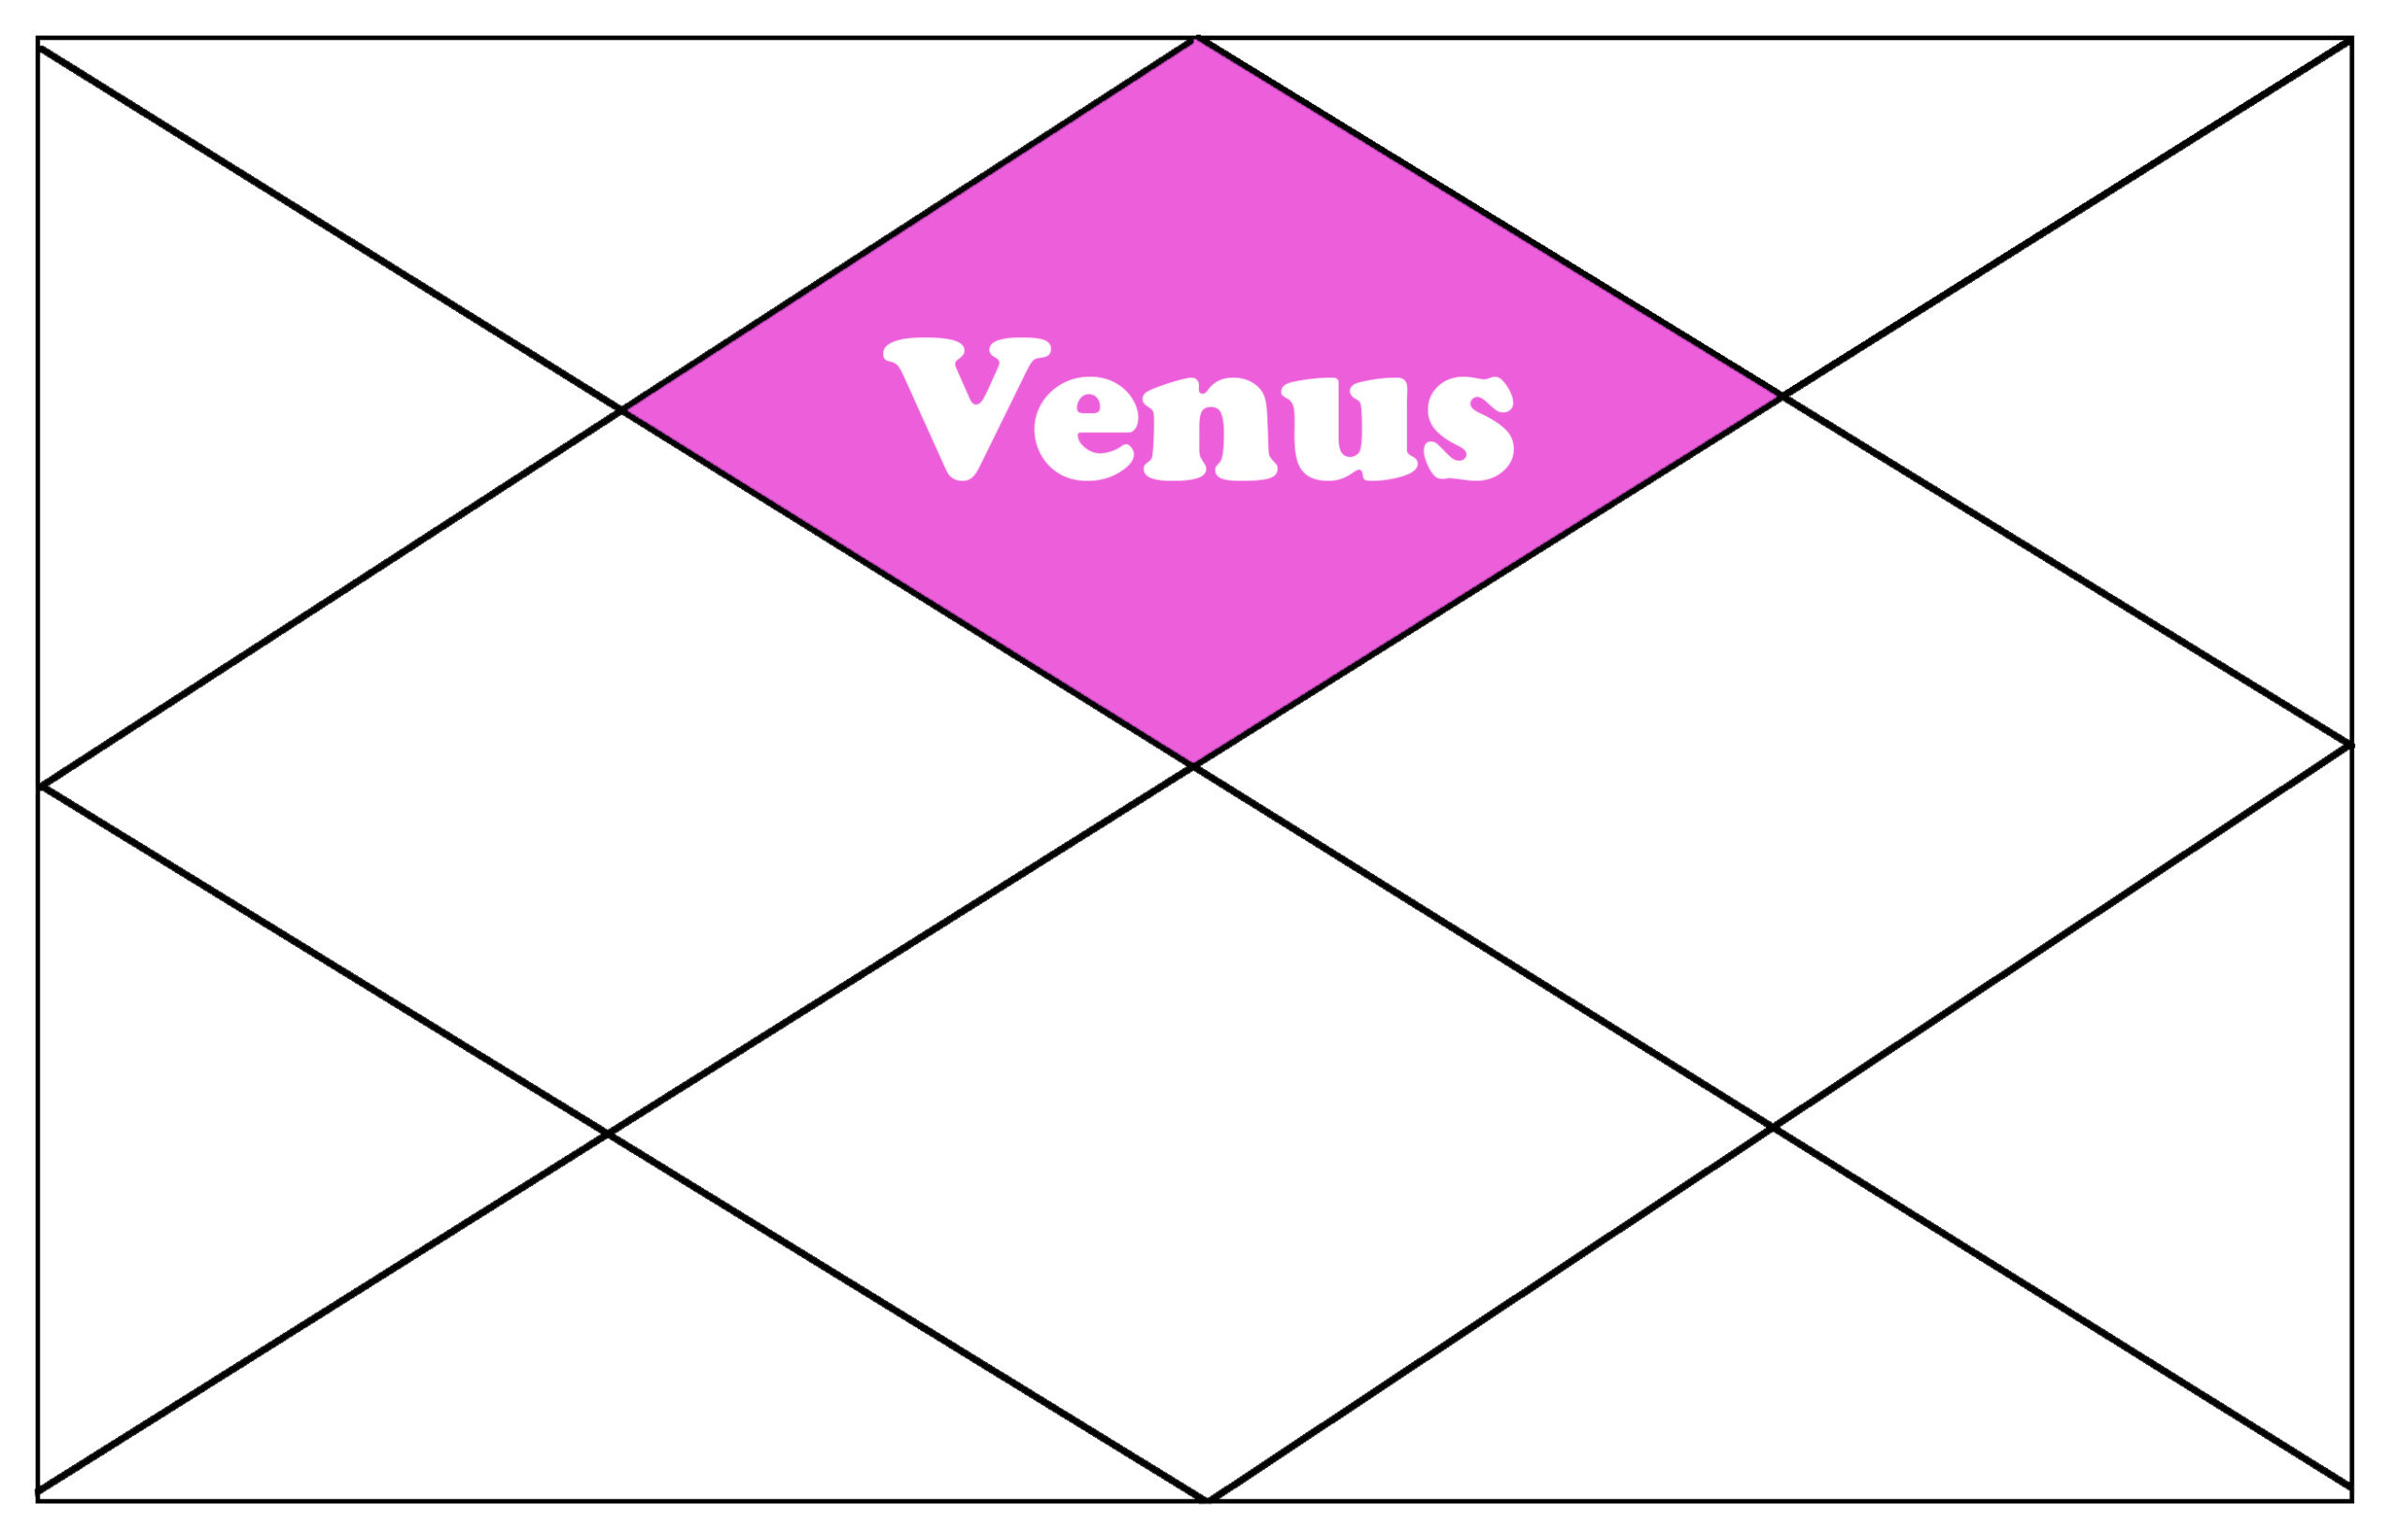 Venus in the 1st house